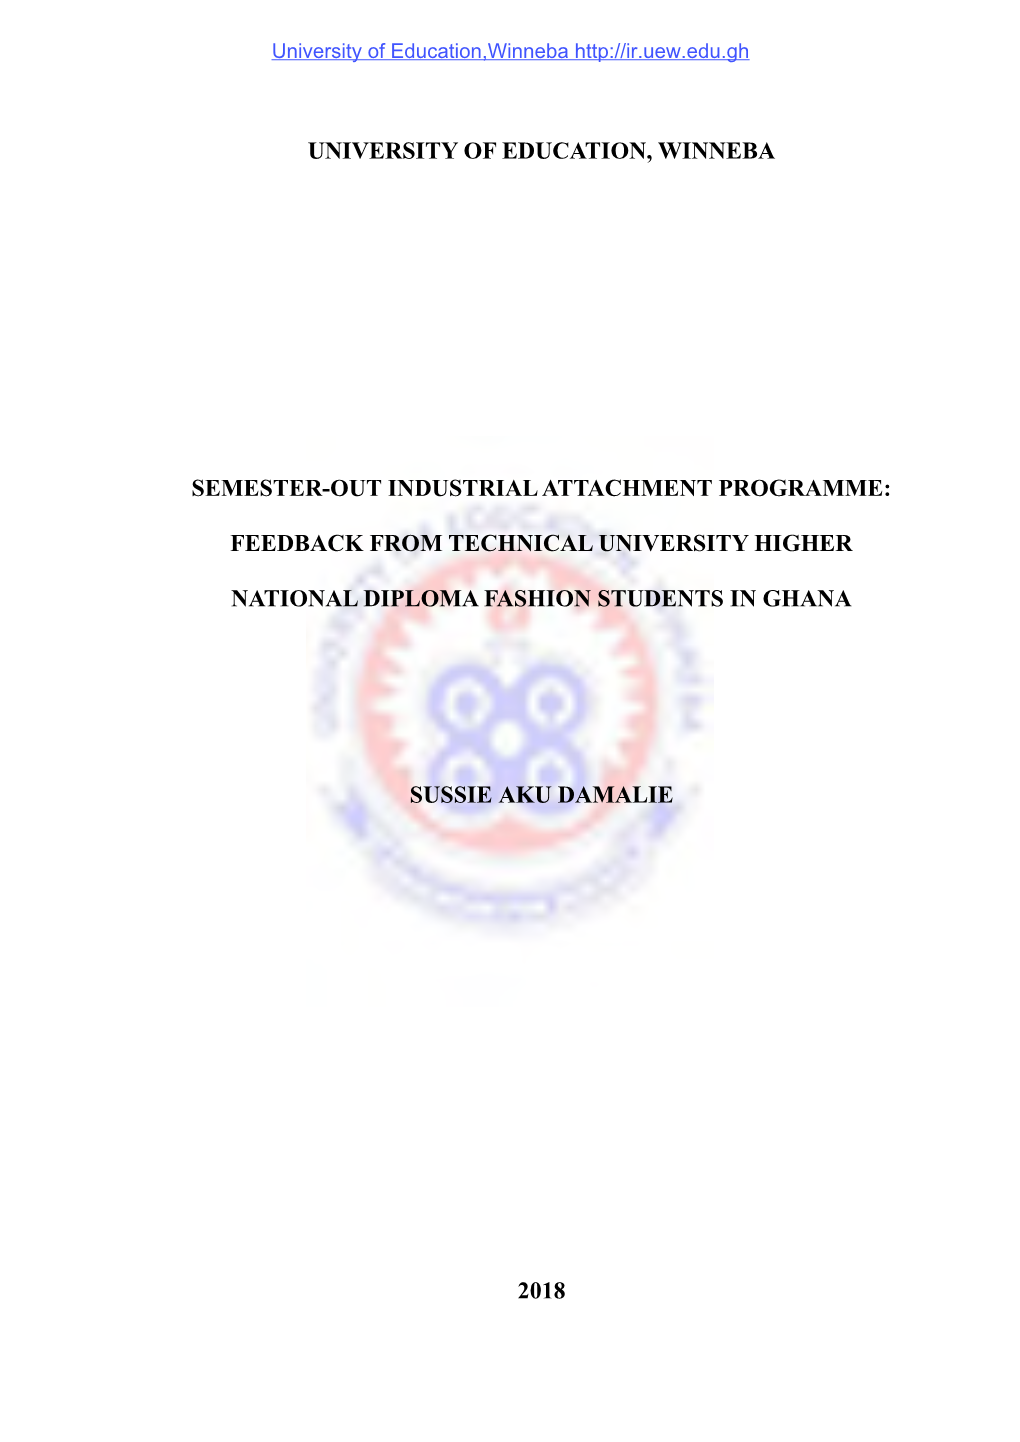 Feedback from Technical University Higher National